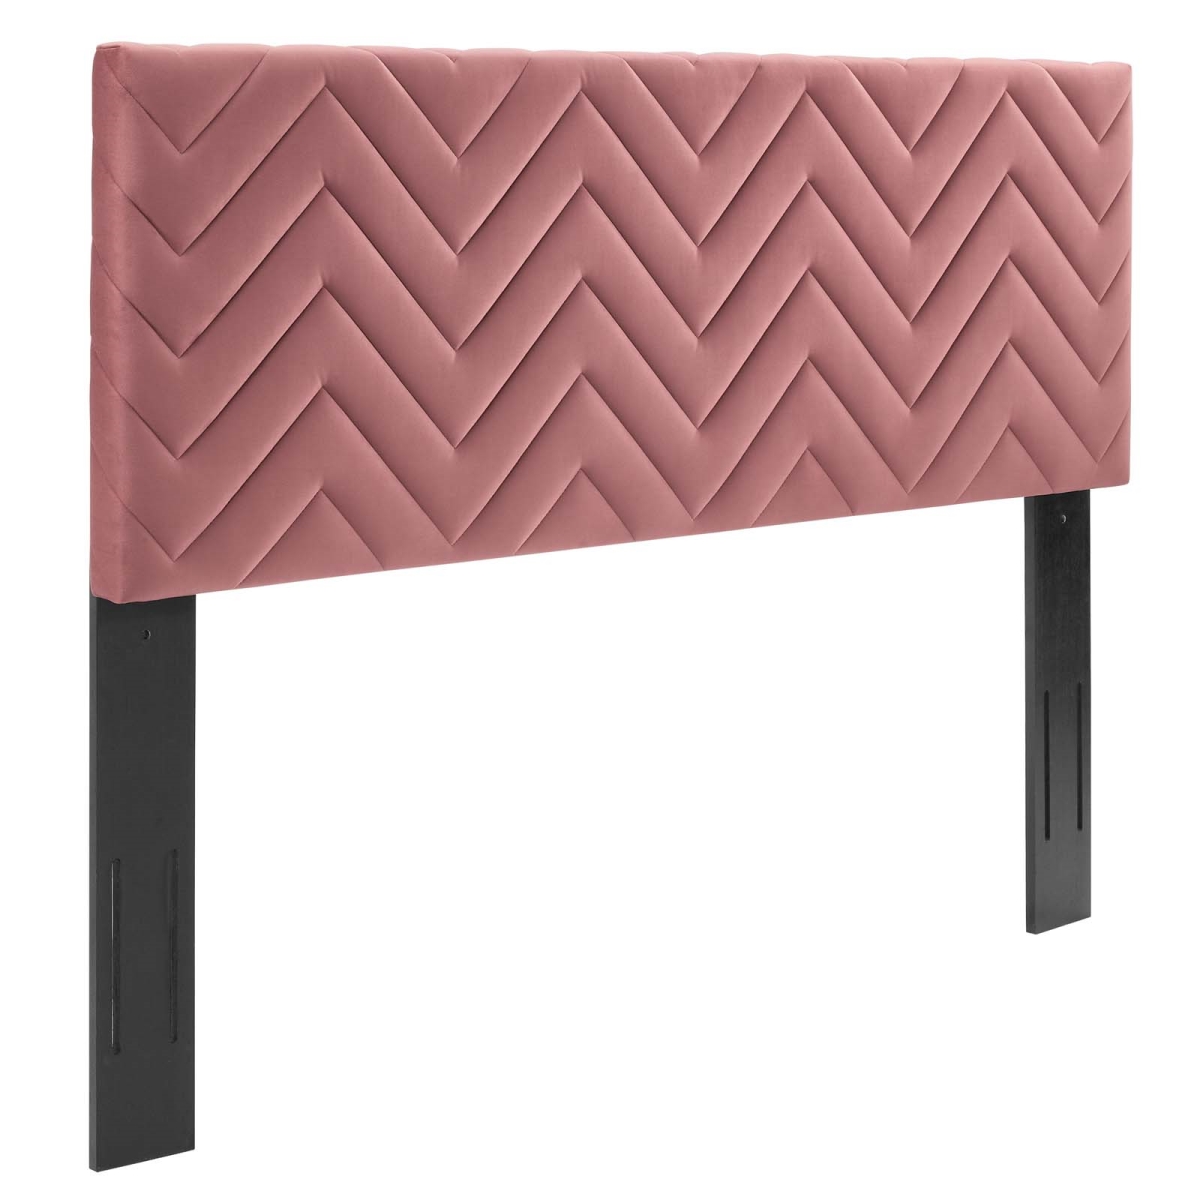 Picture of Modway Furniture MOD-6658-DUS 22.5 x 39 x 0.5 in. Mercy Chevron Tufted Performance Velvet Twin Size Headboard, Dusty Rose